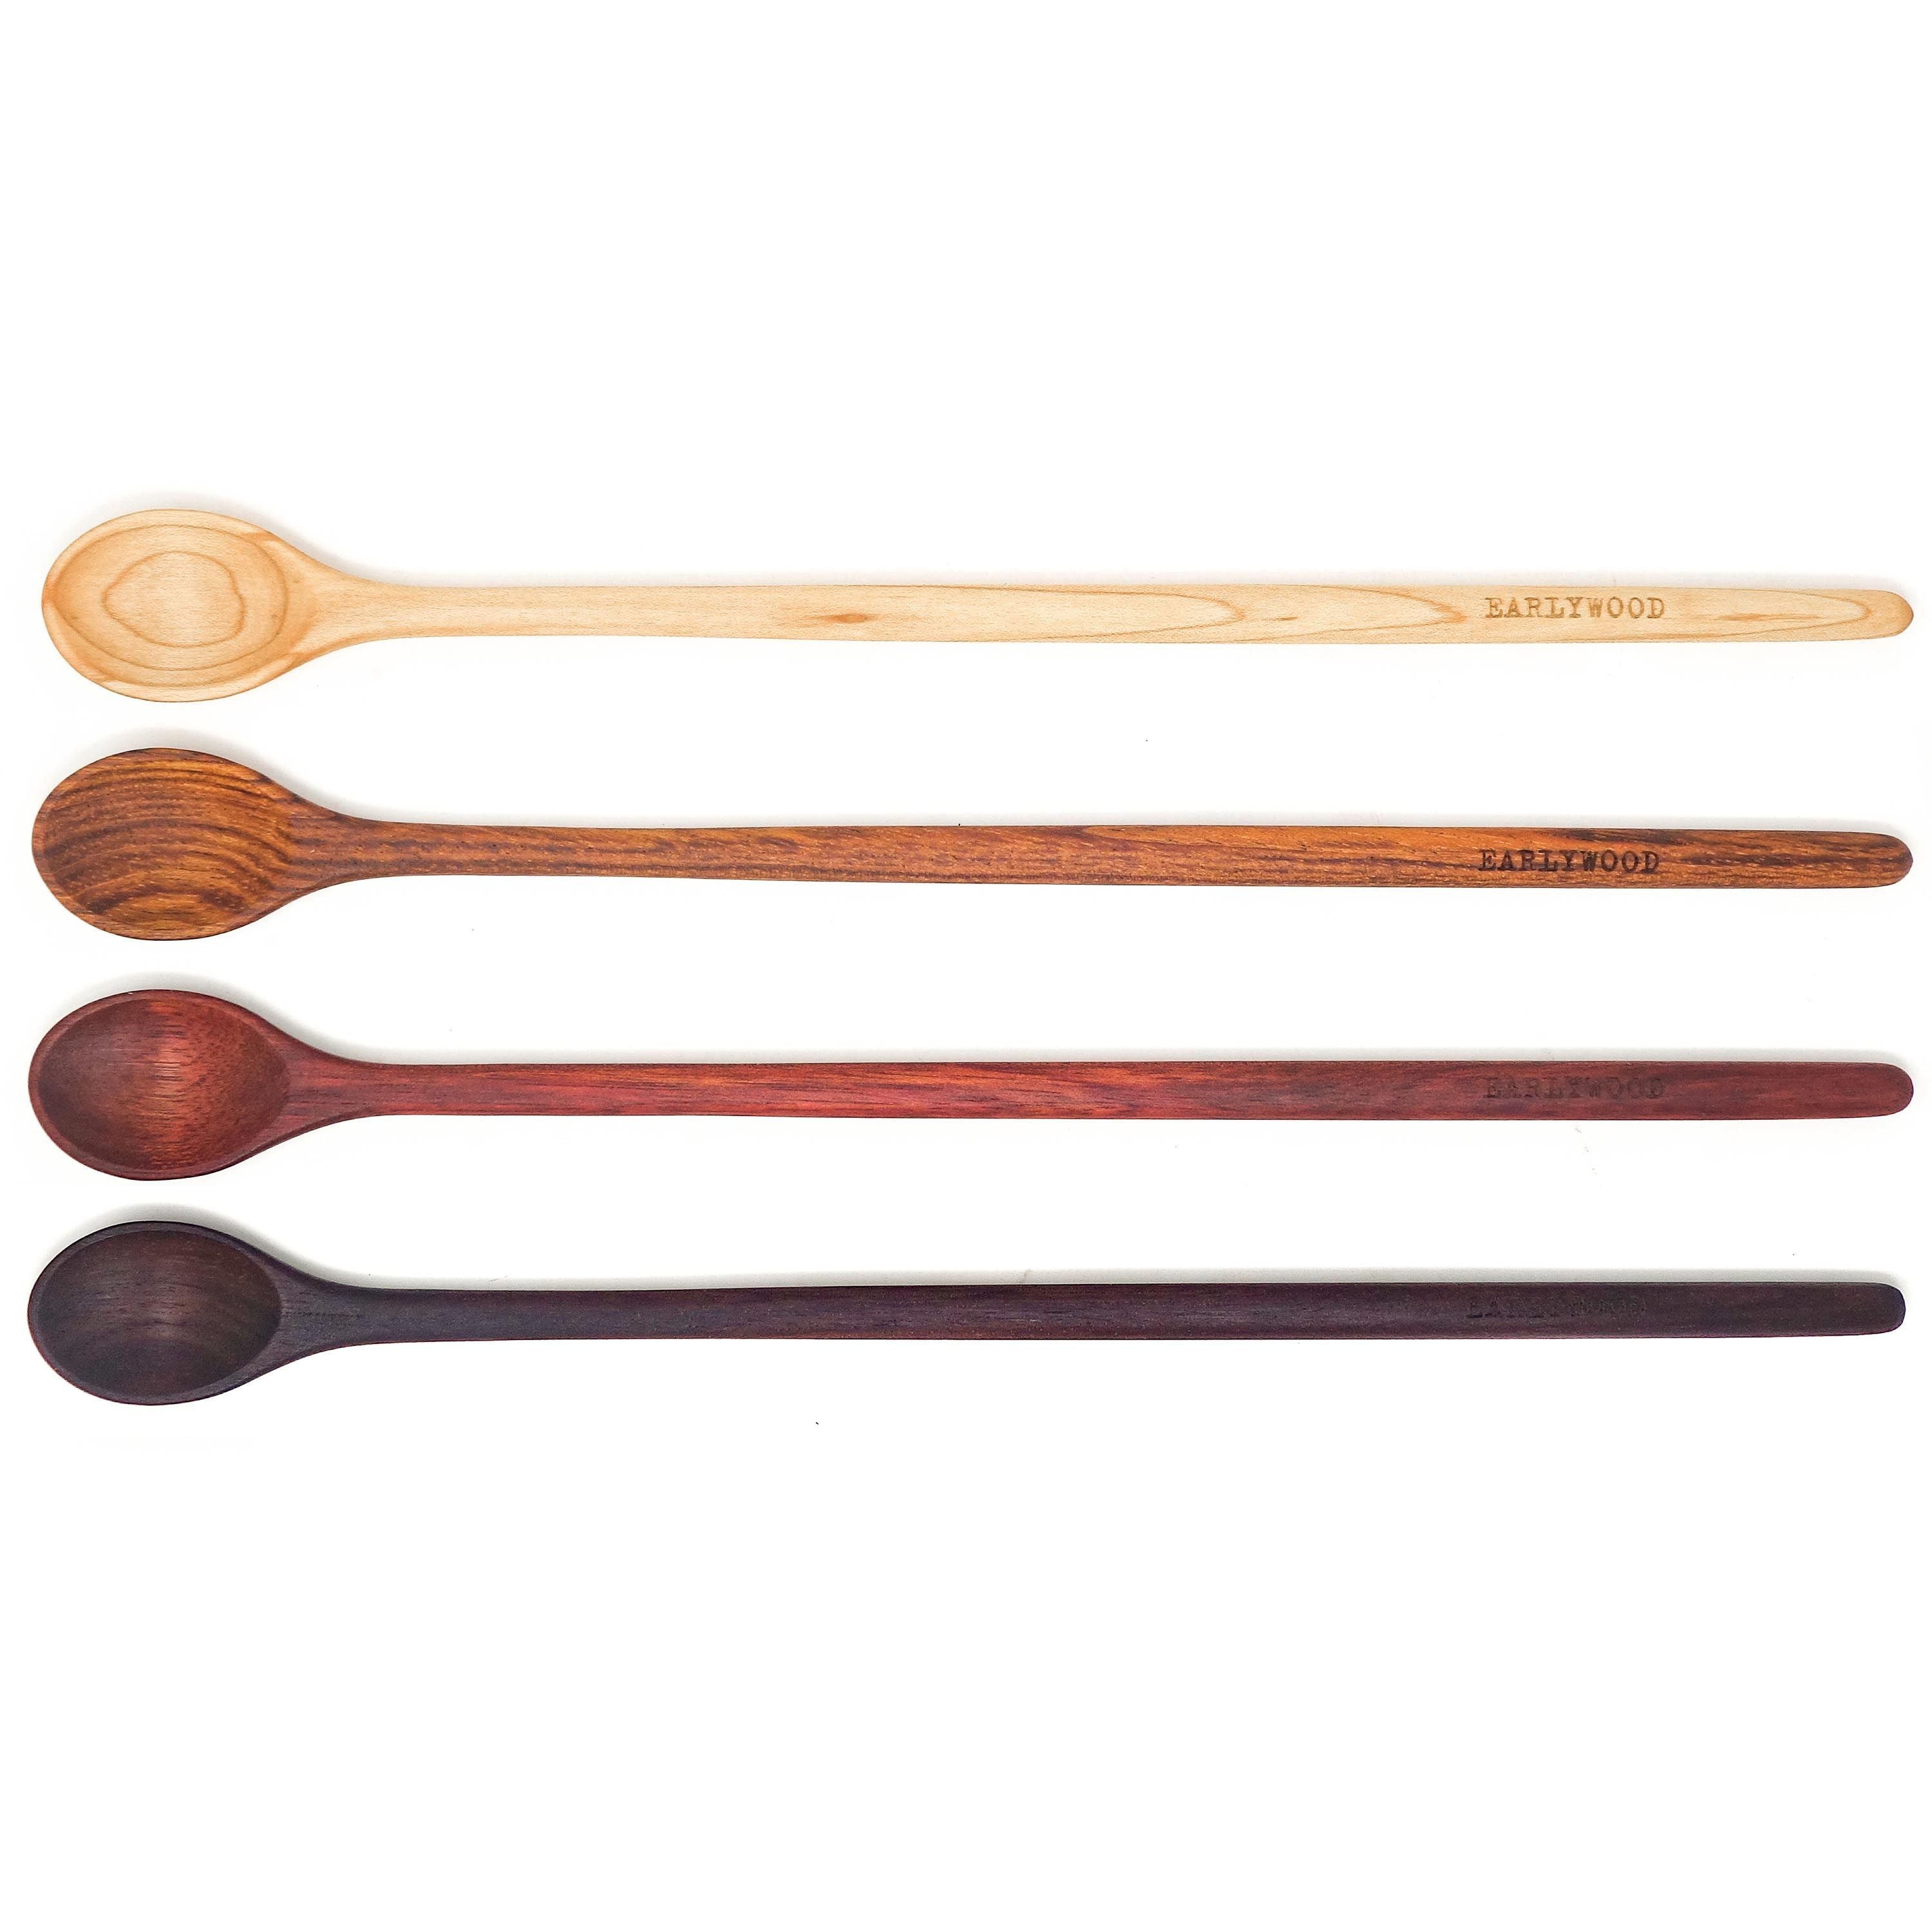 Wooden tasting spoon set gift for coffee lovers